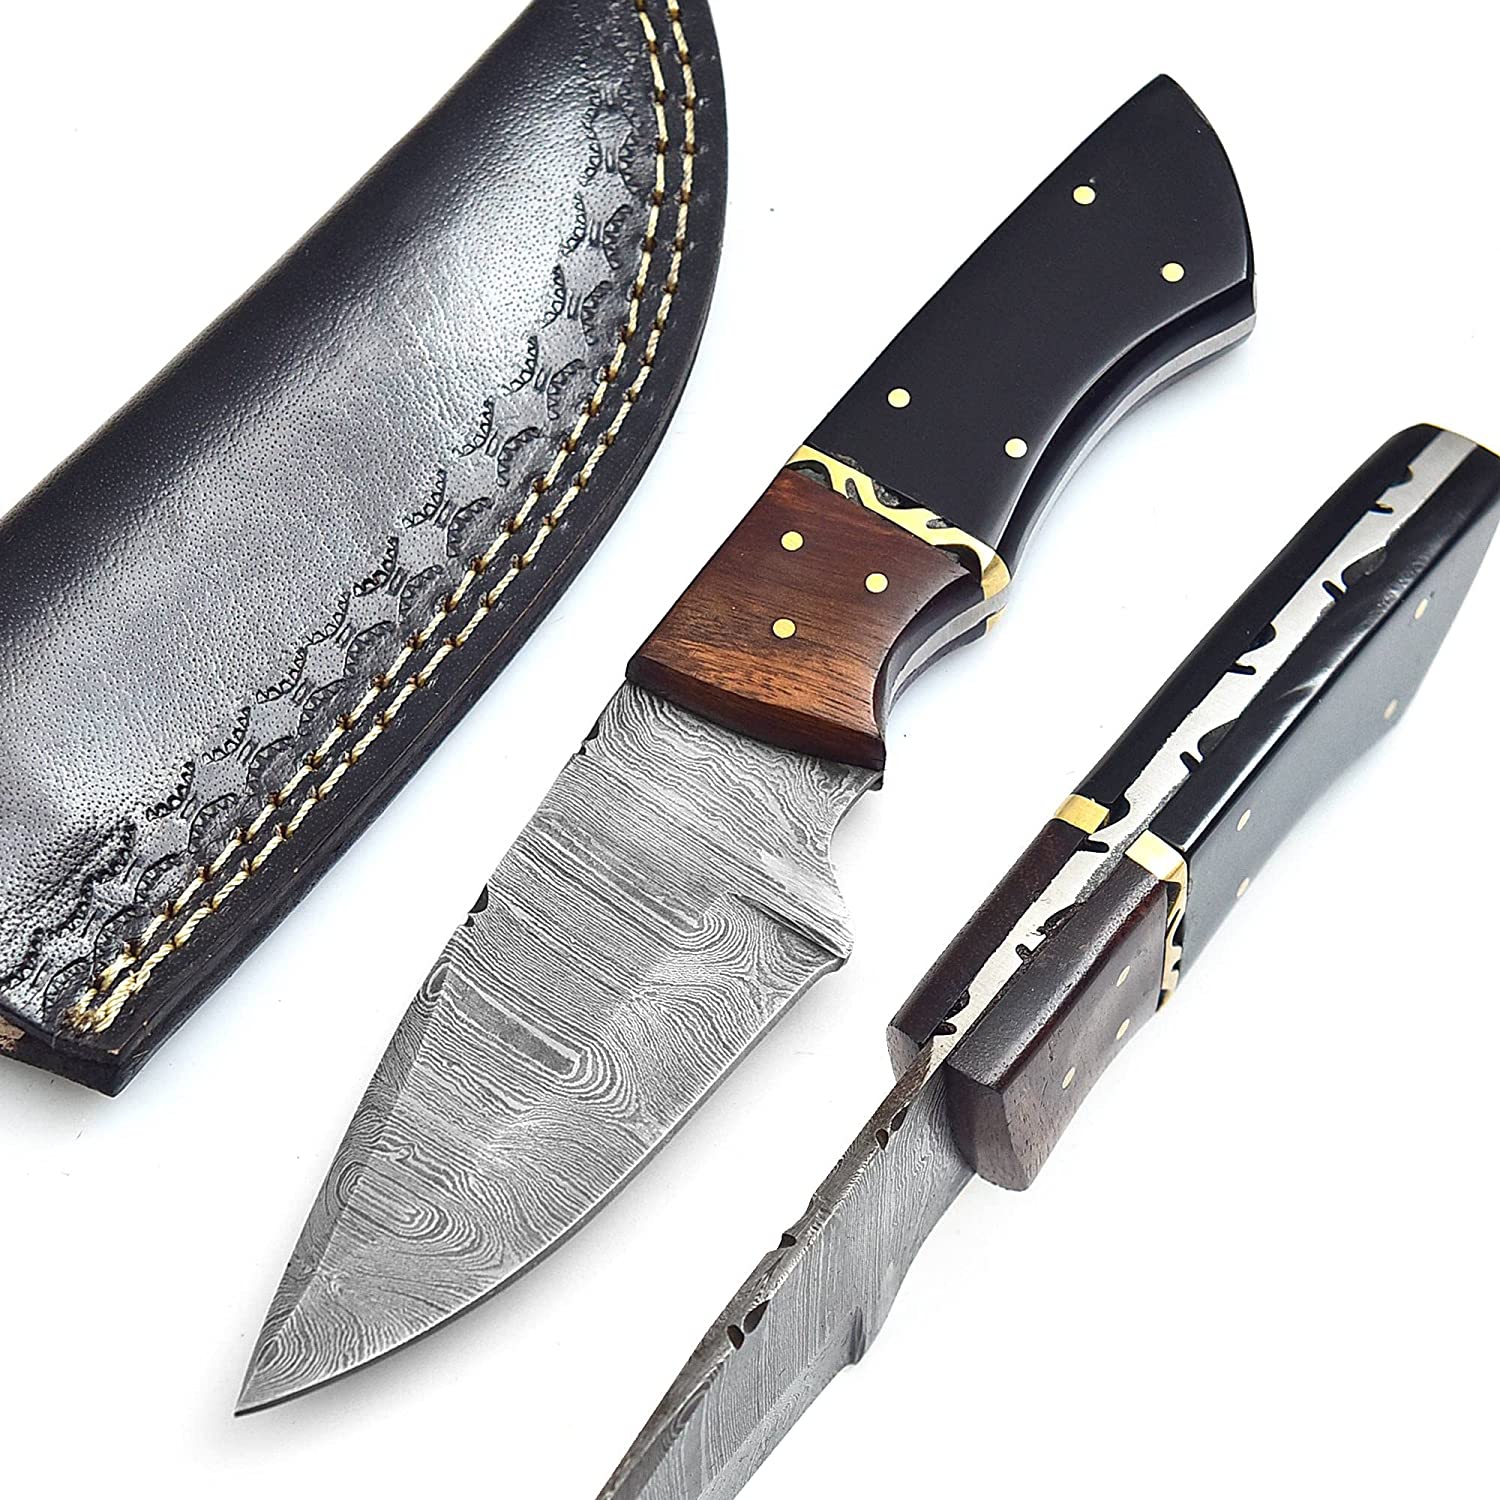 Custom Handmade Damascus Hunting Knife – Best Damascus steel Fixed Blade Hunting Skinning Knife Camping, Survival Knife with Leather Sheath/Cover.